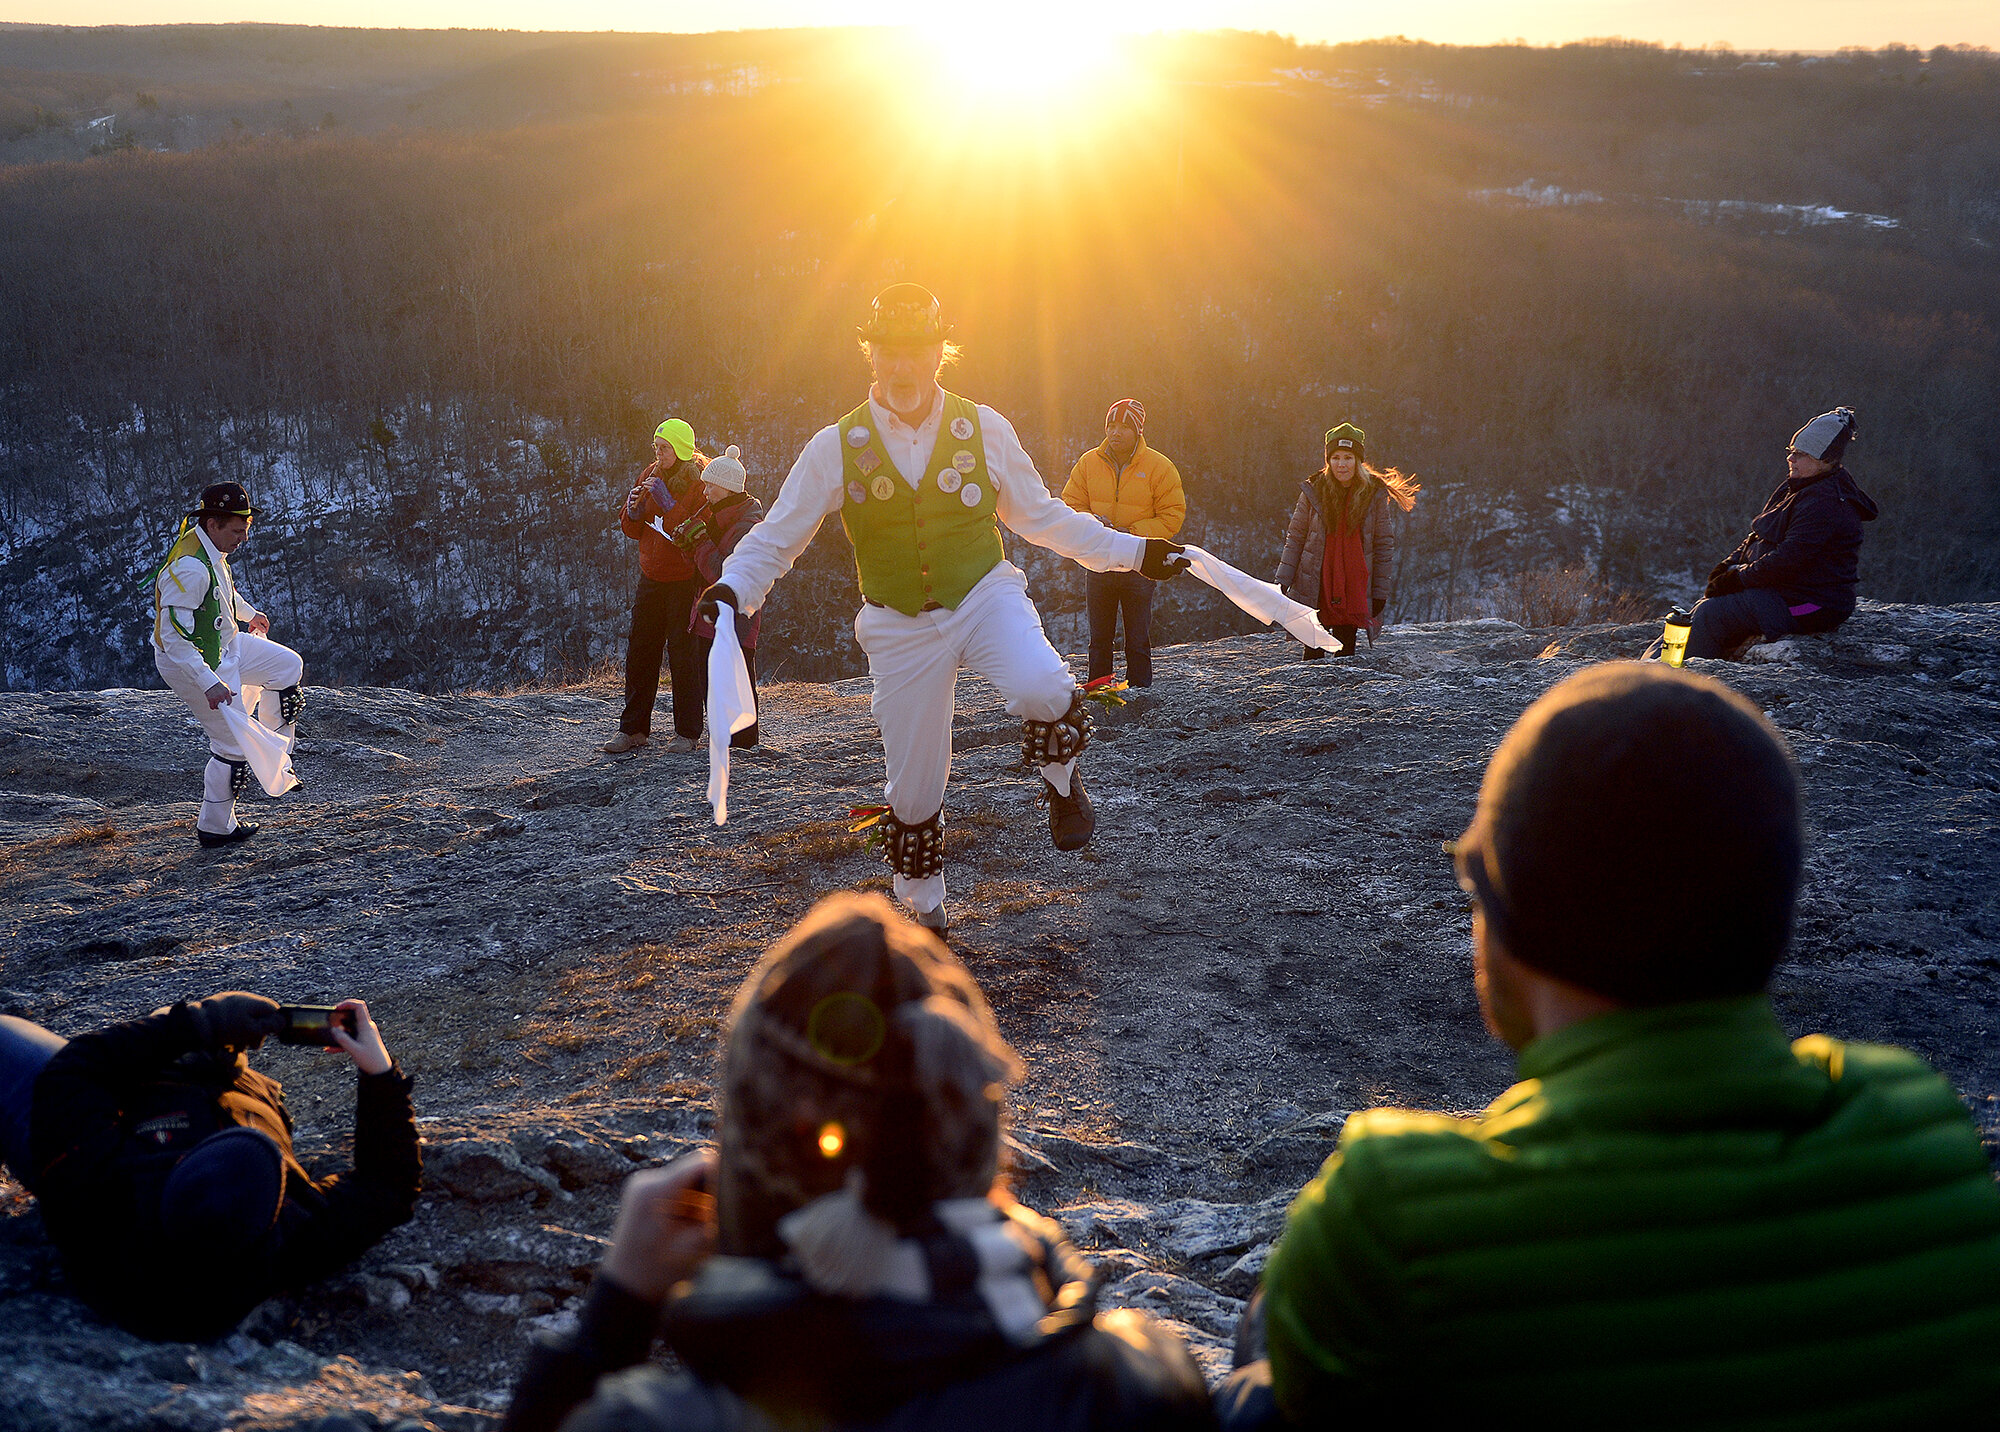  Spectators watch as the Westerly Morris Men mark the sunrise of the first day of spring on Tuesday, March 20, 2018, on top of Lantern Hill in North Stonington. The a traditional English ritual dancing group was founded over 40 years ago and has been